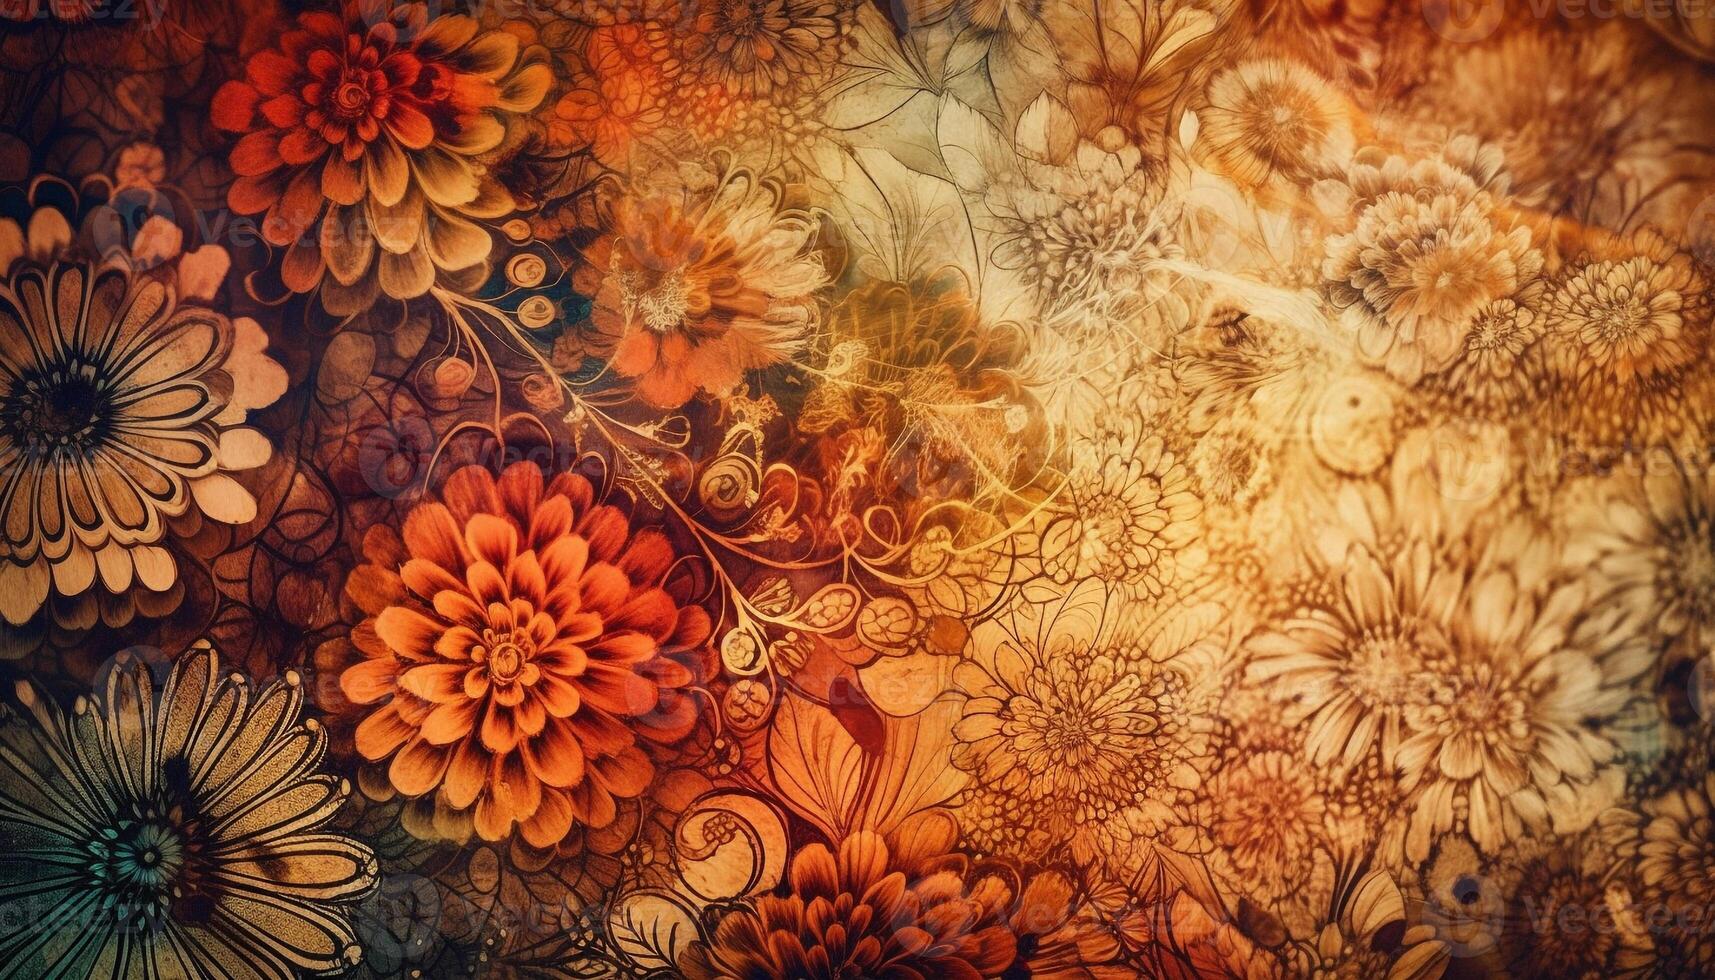 Yellow daisy creates ornate floral wallpaper design generated by AI photo